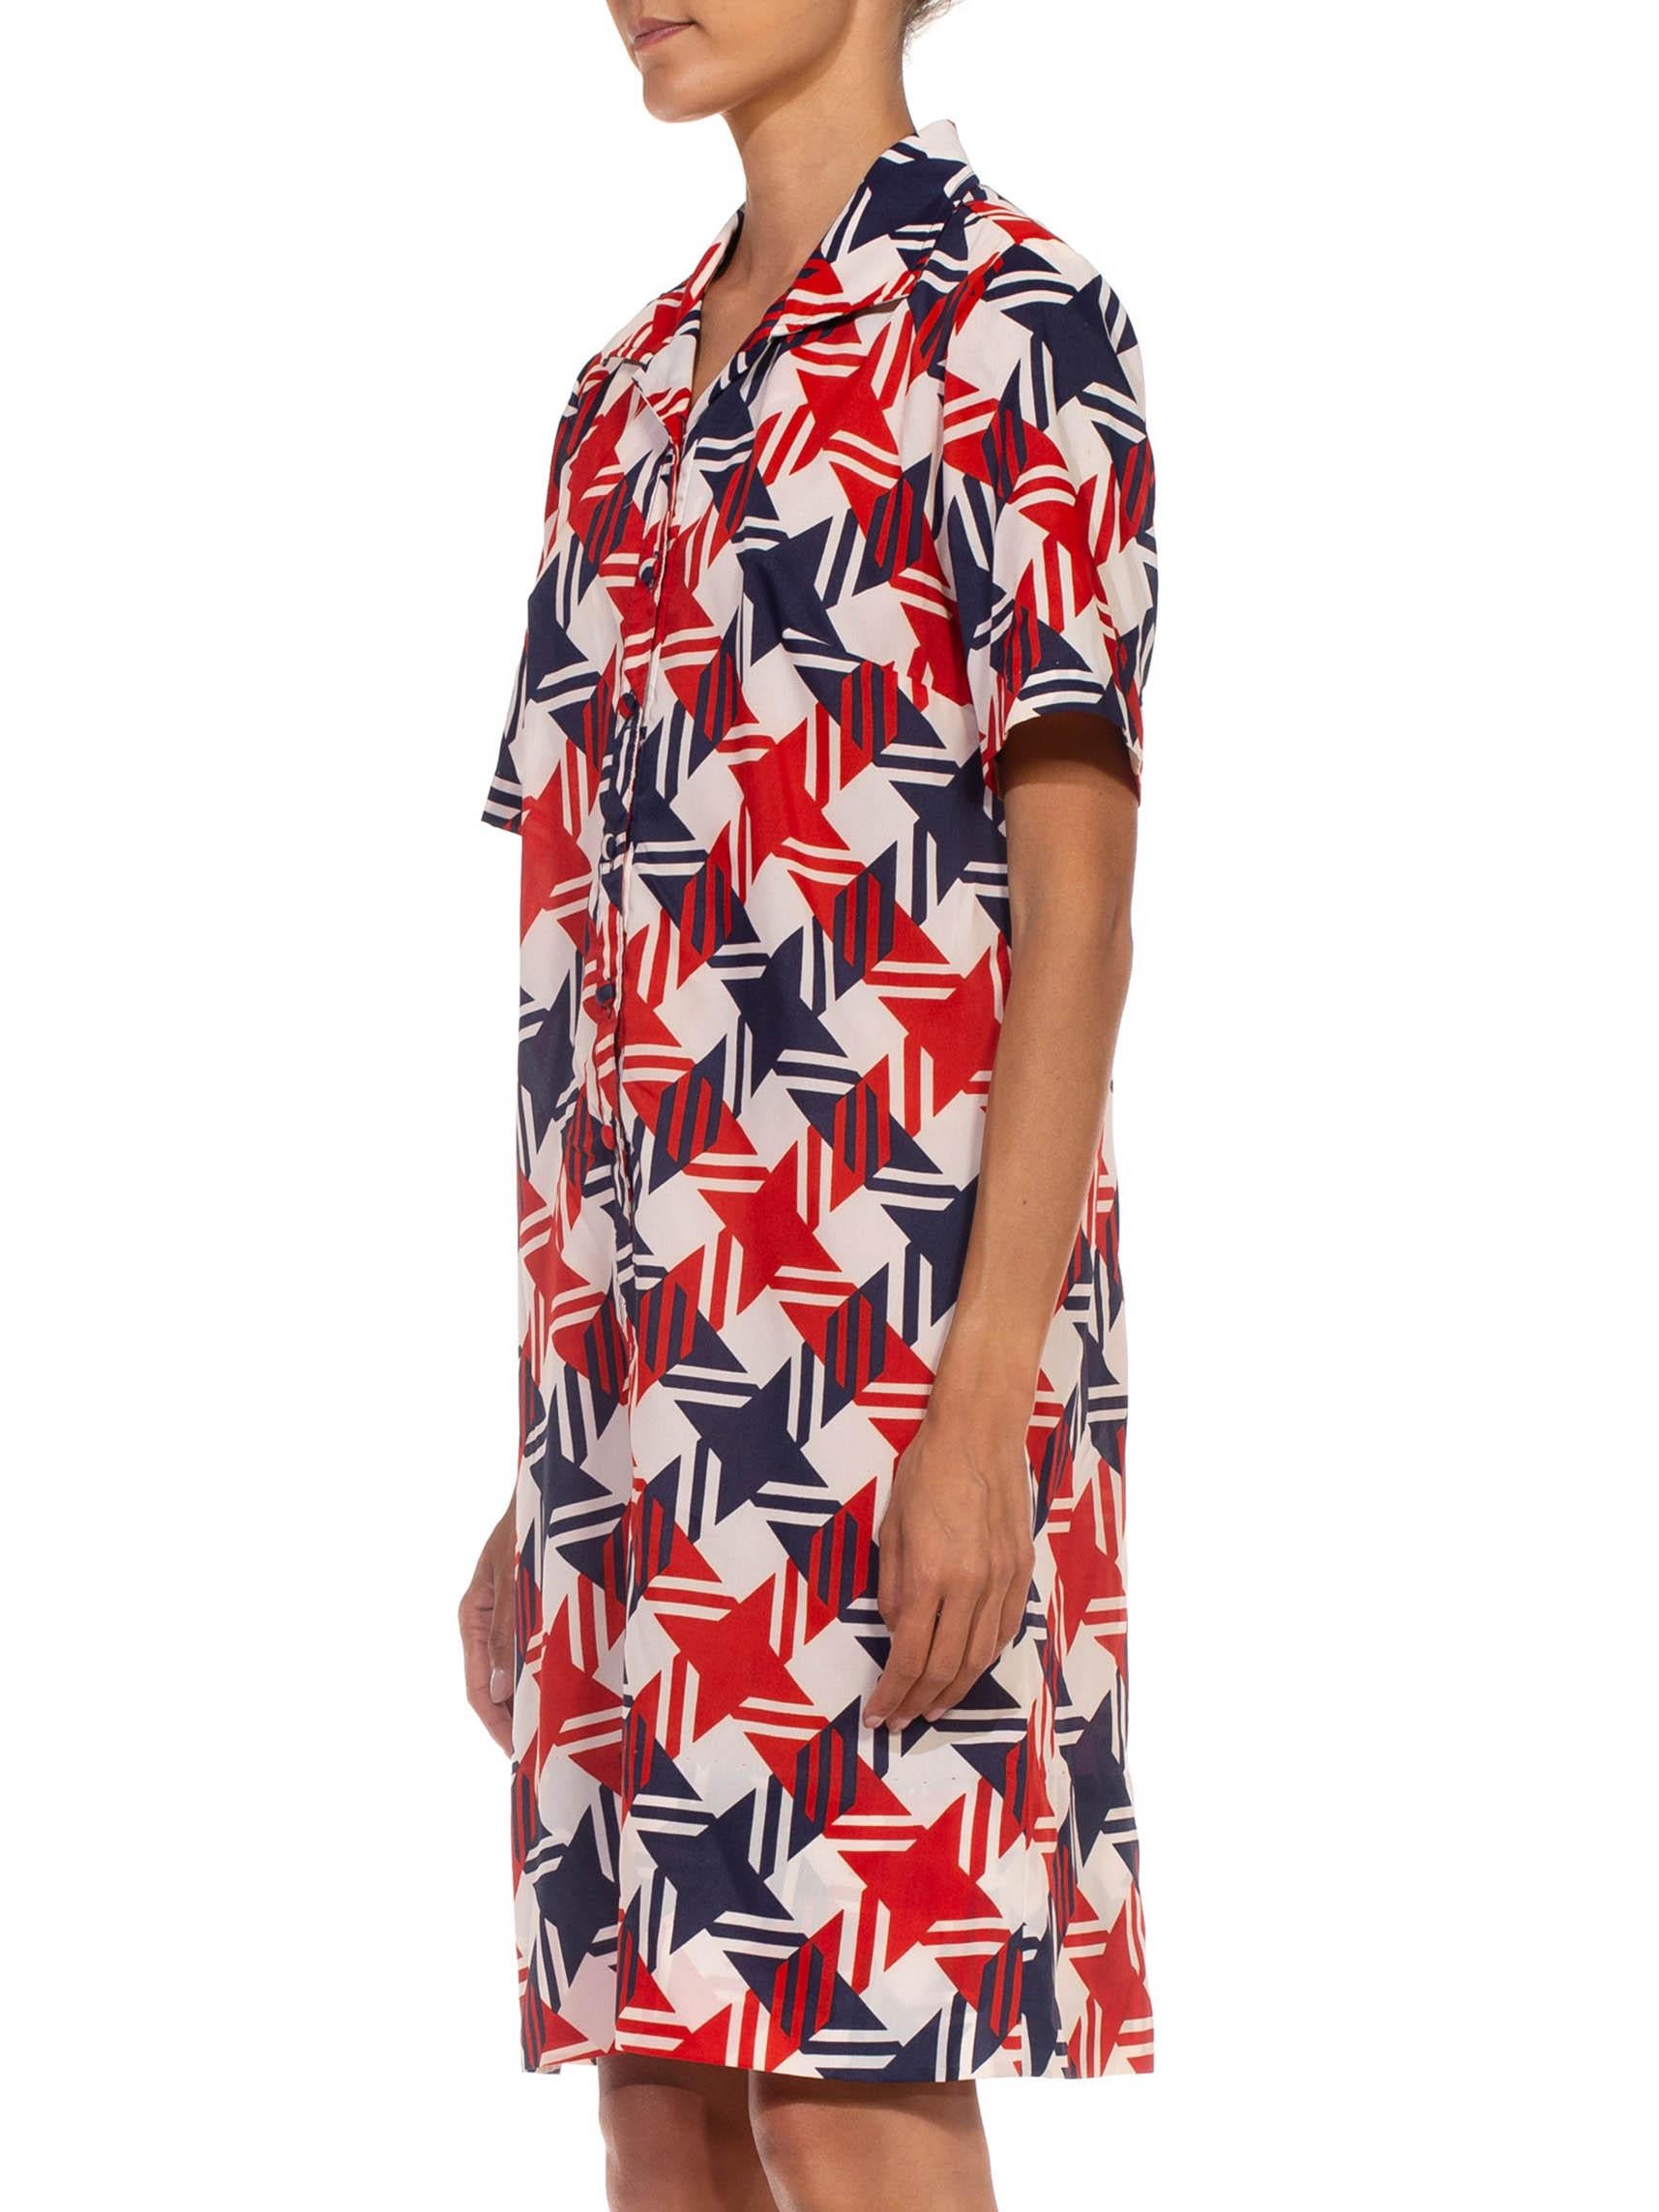 1960S Red White & Blue Polyester Gingham Plaid Print Mod Dress In Excellent Condition For Sale In New York, NY